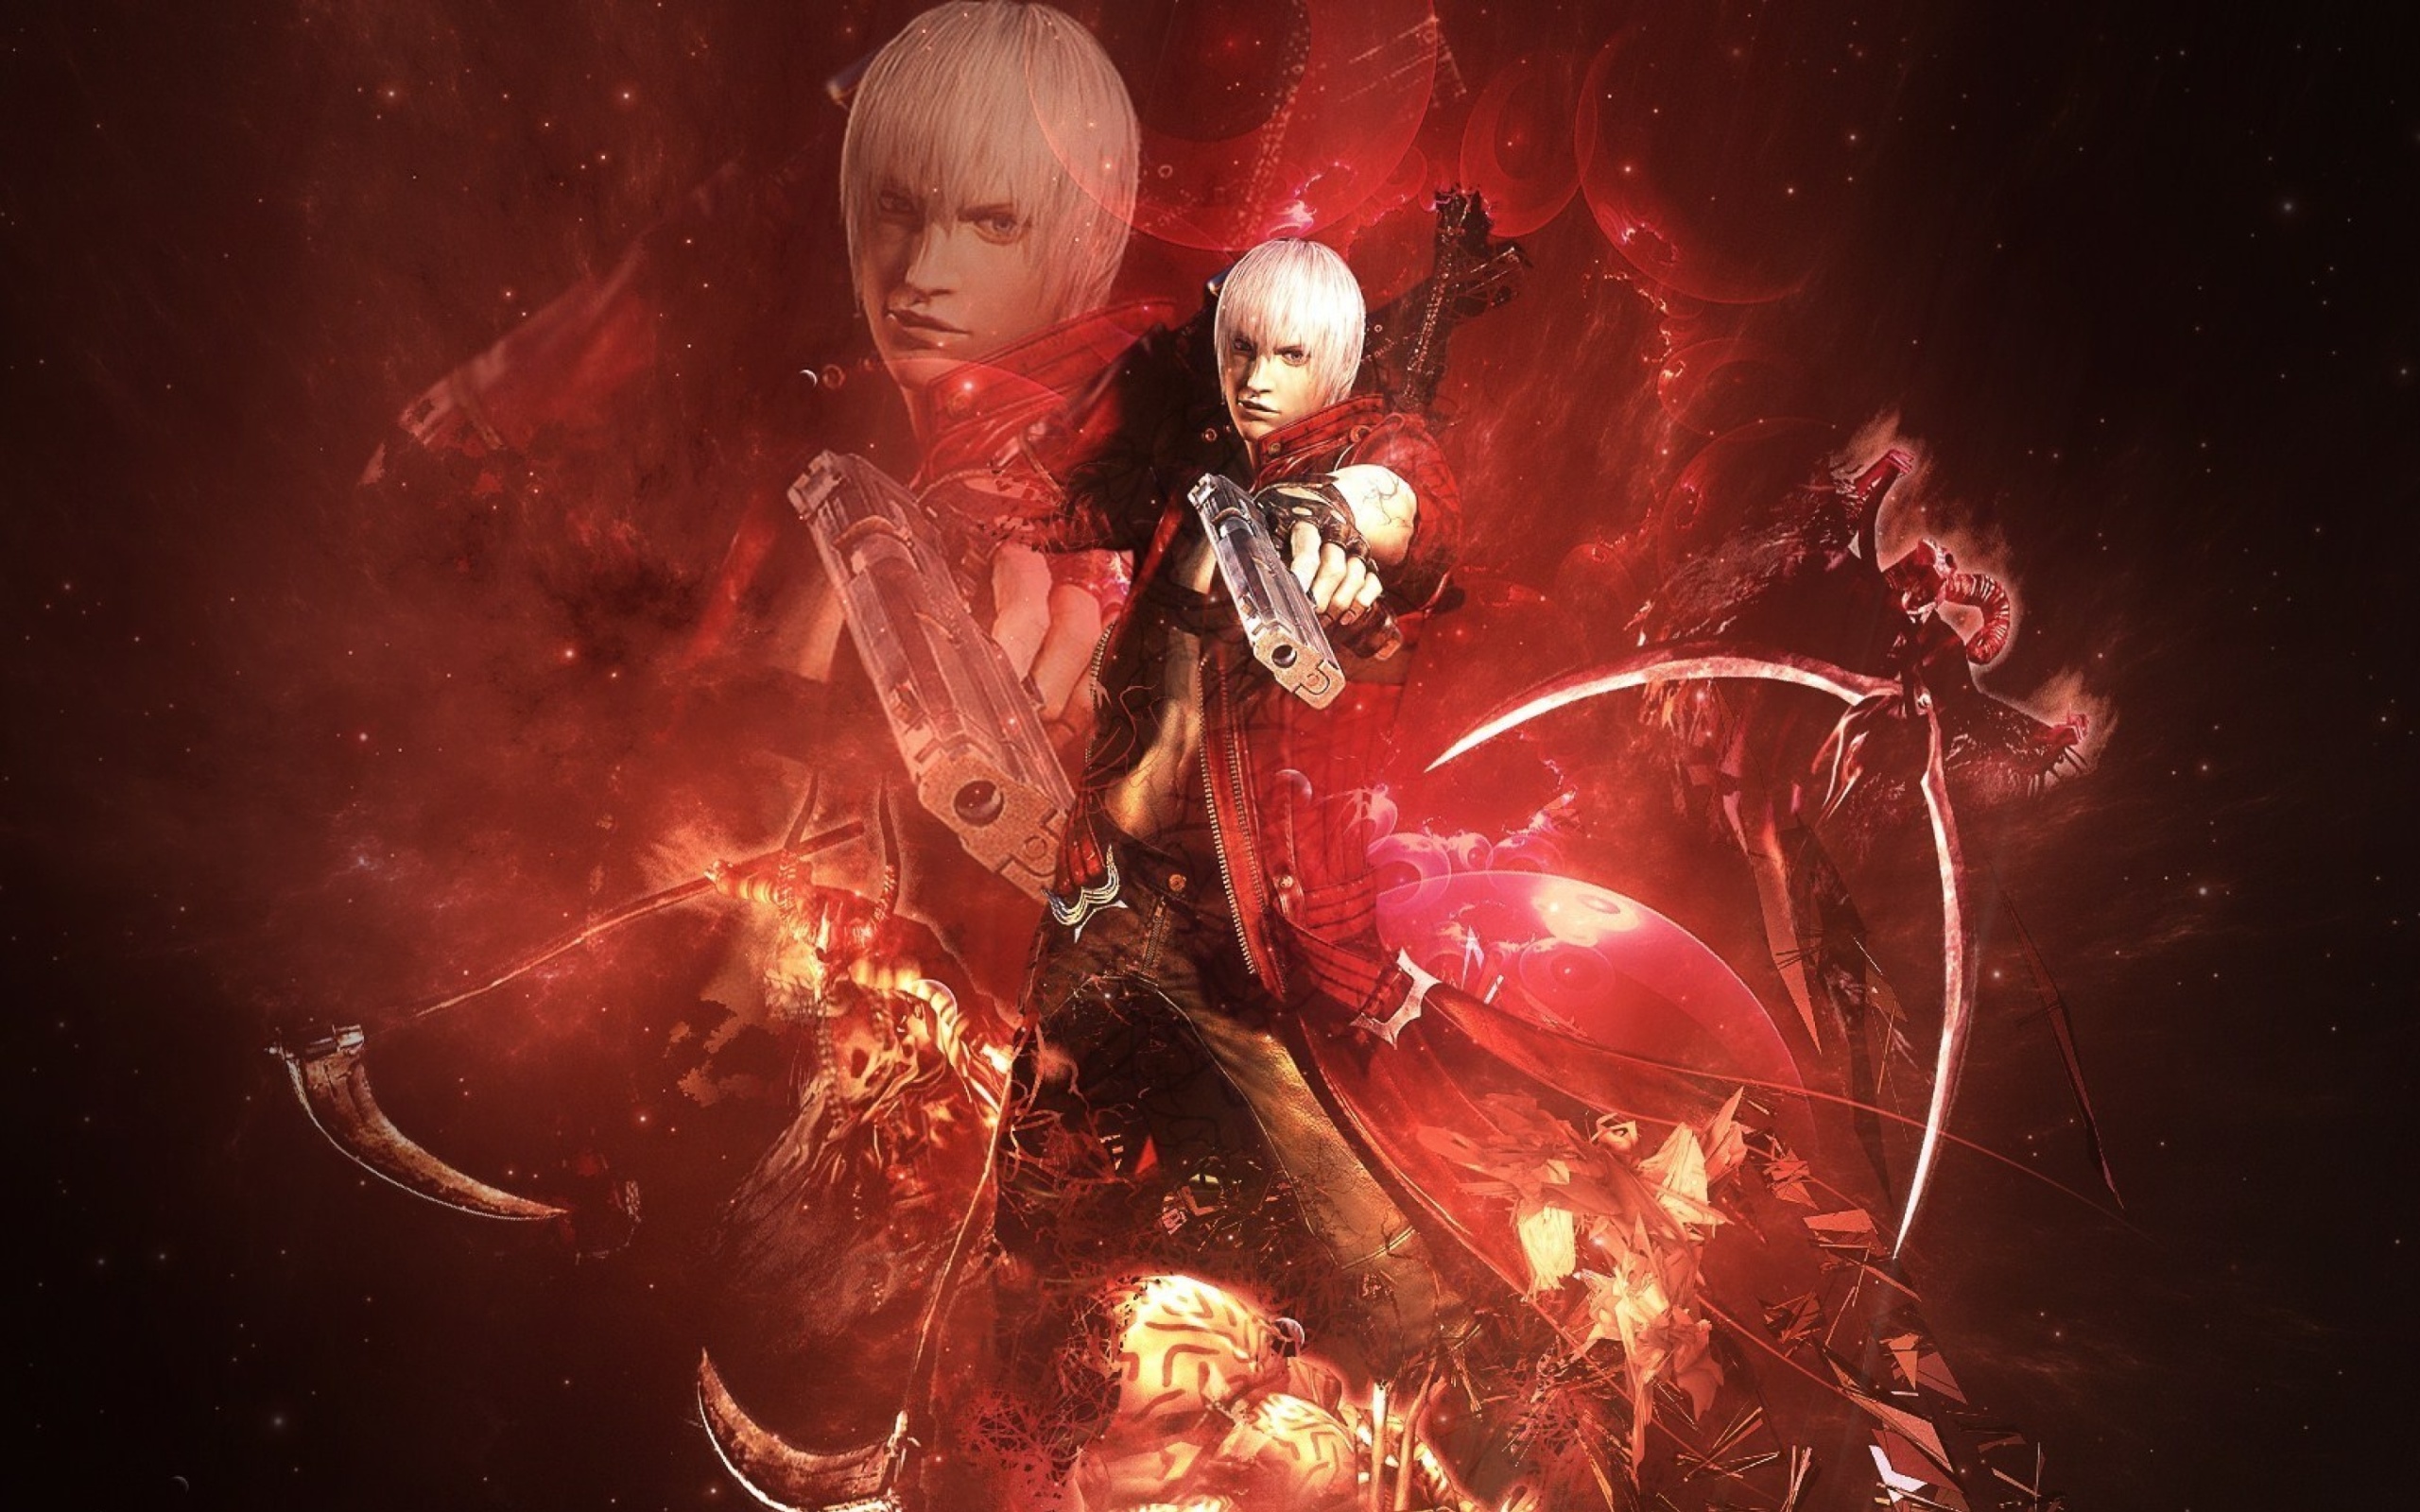 Devil may cry 3 wallpaper 2560x1600